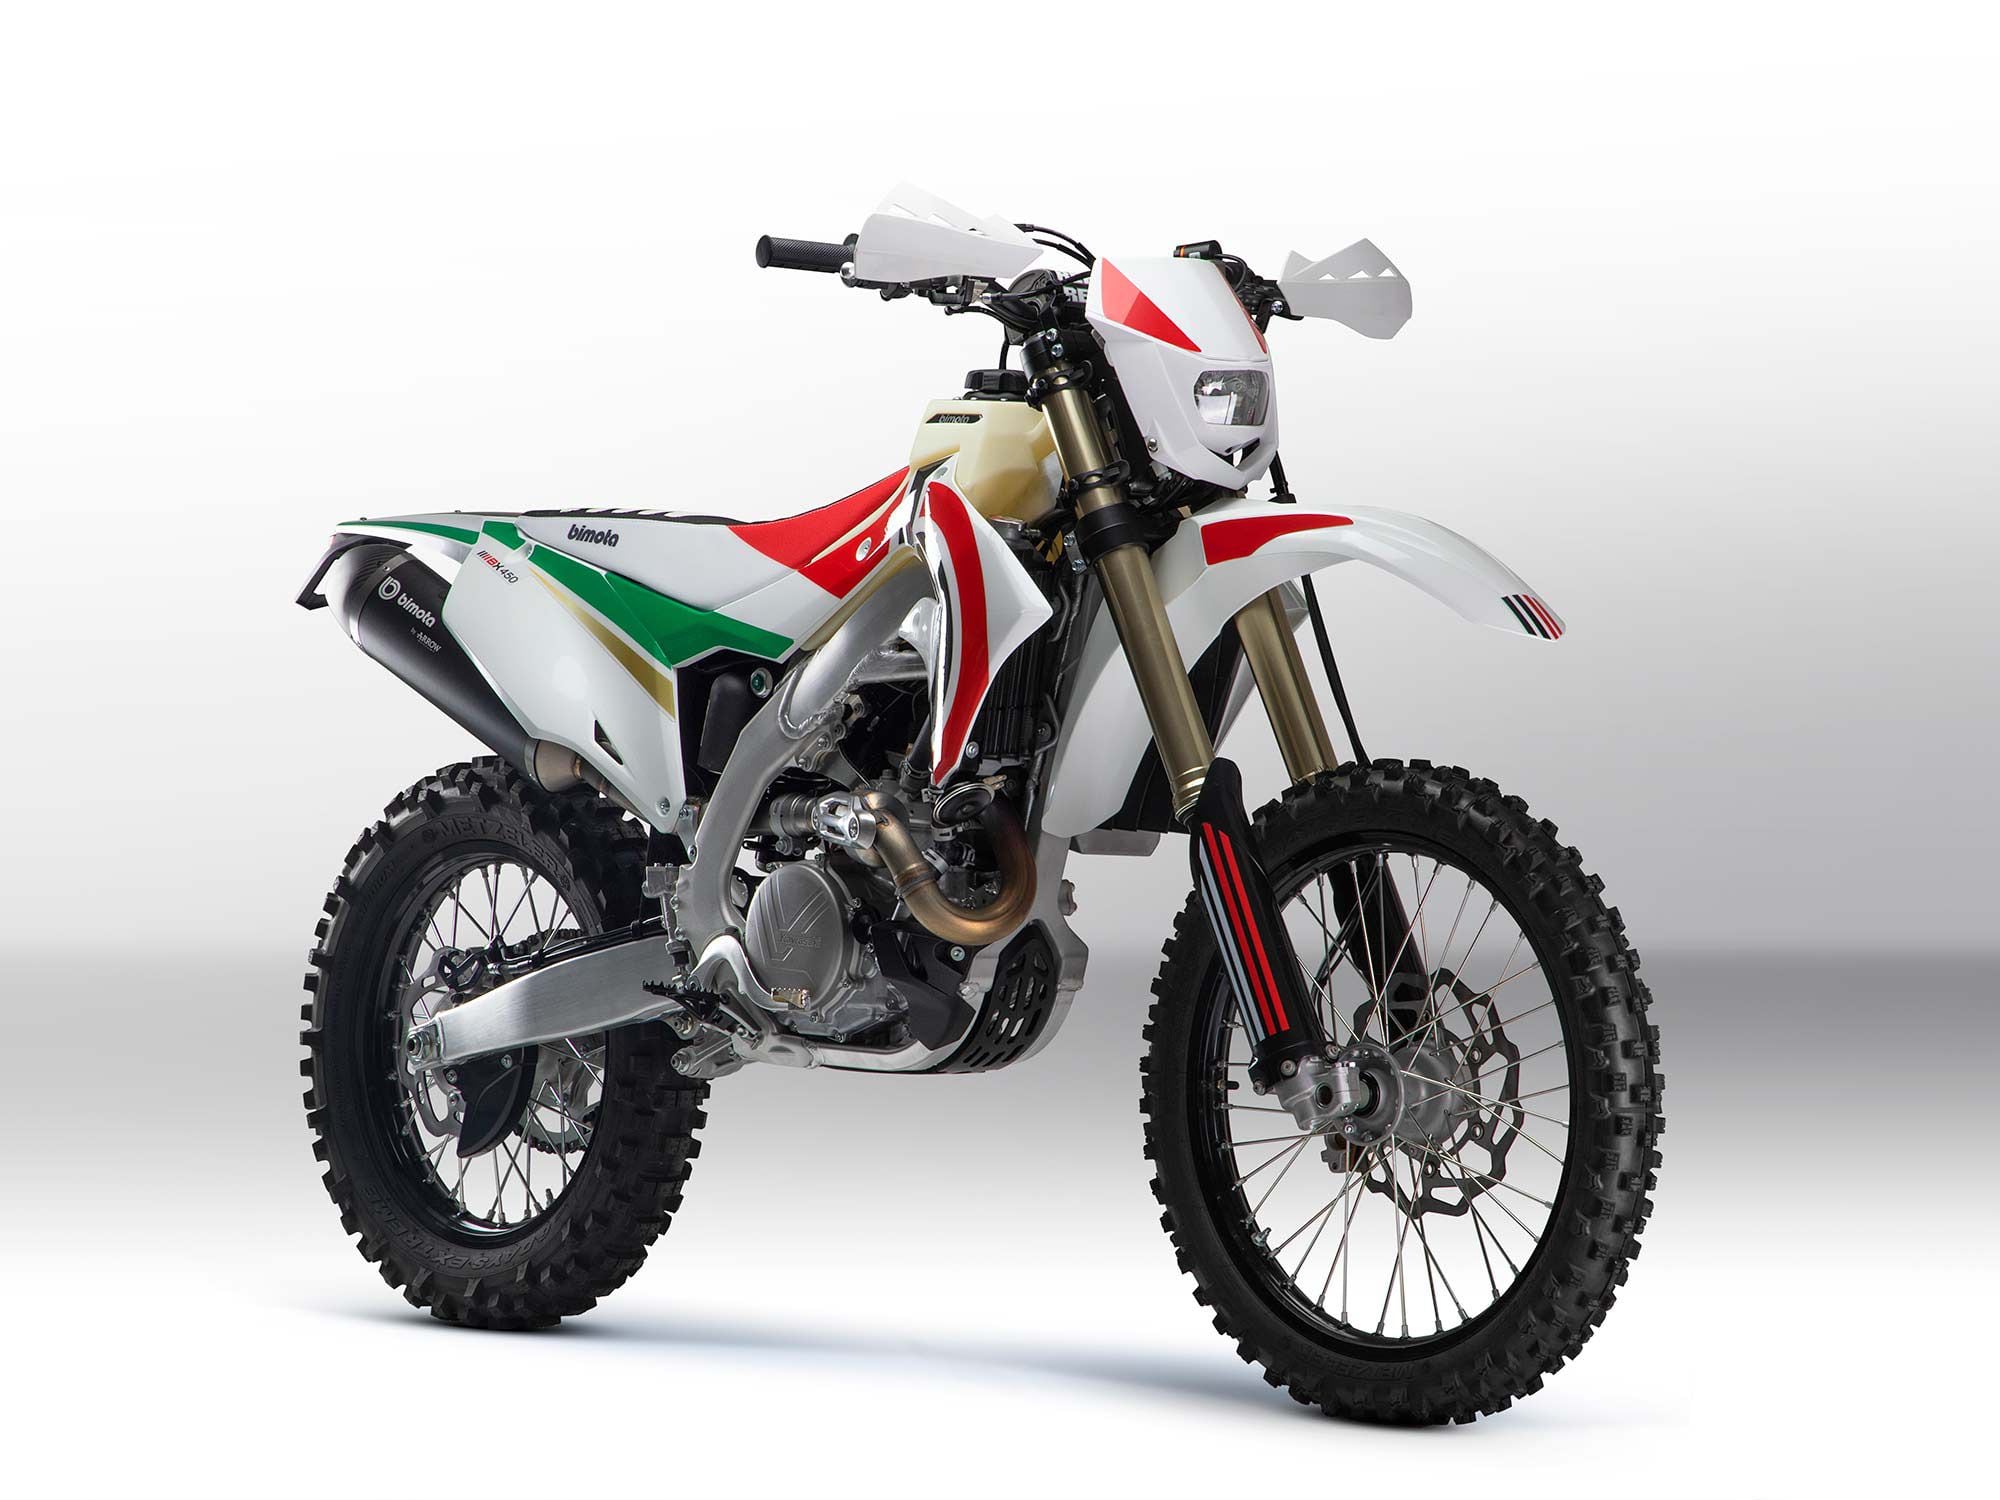 The 2023 Bimota BX450 is ready for some serious off-road action due to some simple upgrades to the already-proven Kawasaki KX450X cross-country model.